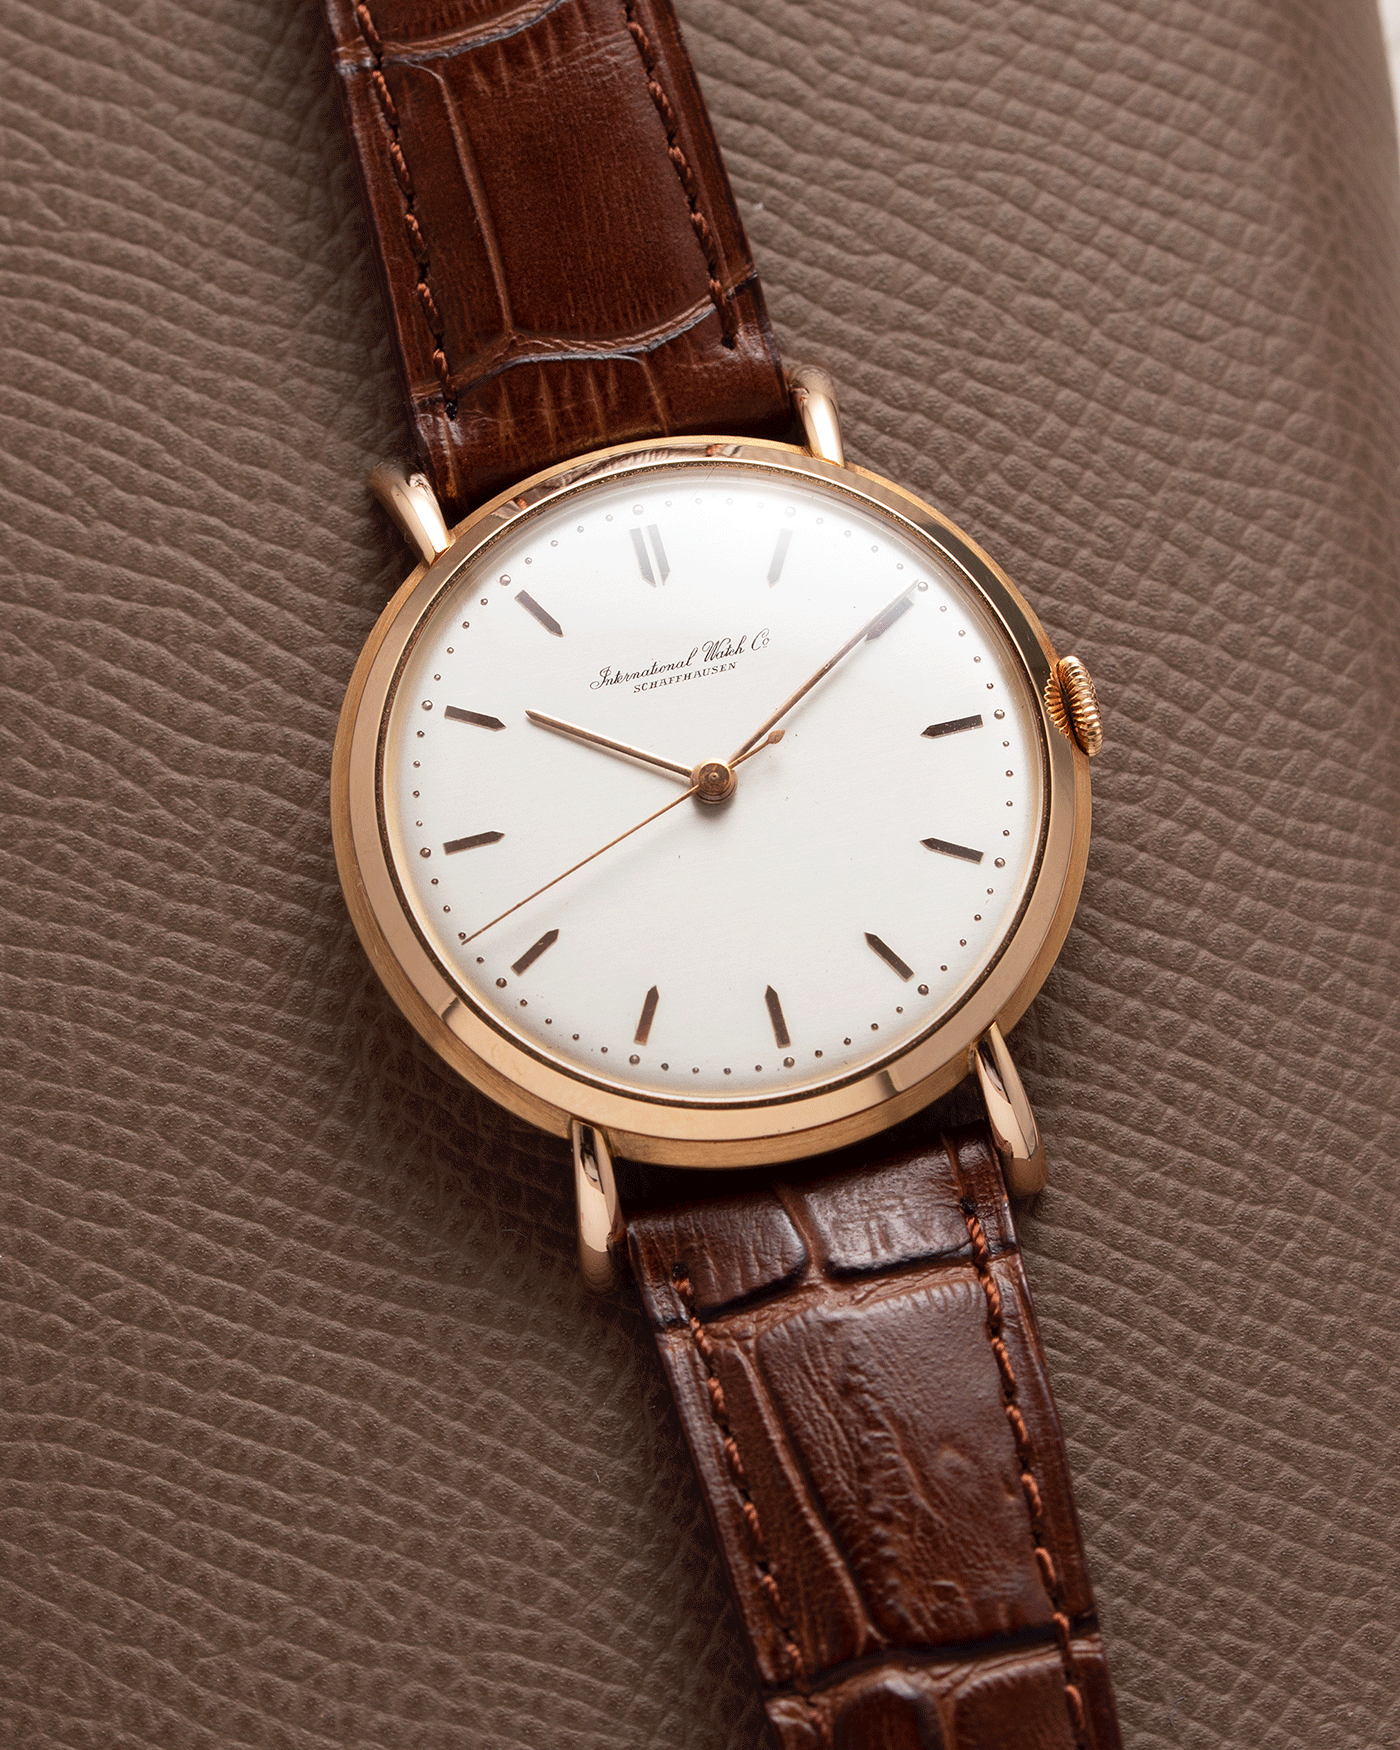 Brand: IWC Year: 1949 Serial Number: 1193964 Material: 18k Rose Gold Movement: In-house Cal. 89 Case Diameter: 36mm Lug Width: 18mm Bracelet/Strap: Brown Textured Leather Strap with Gold Plated Buckle